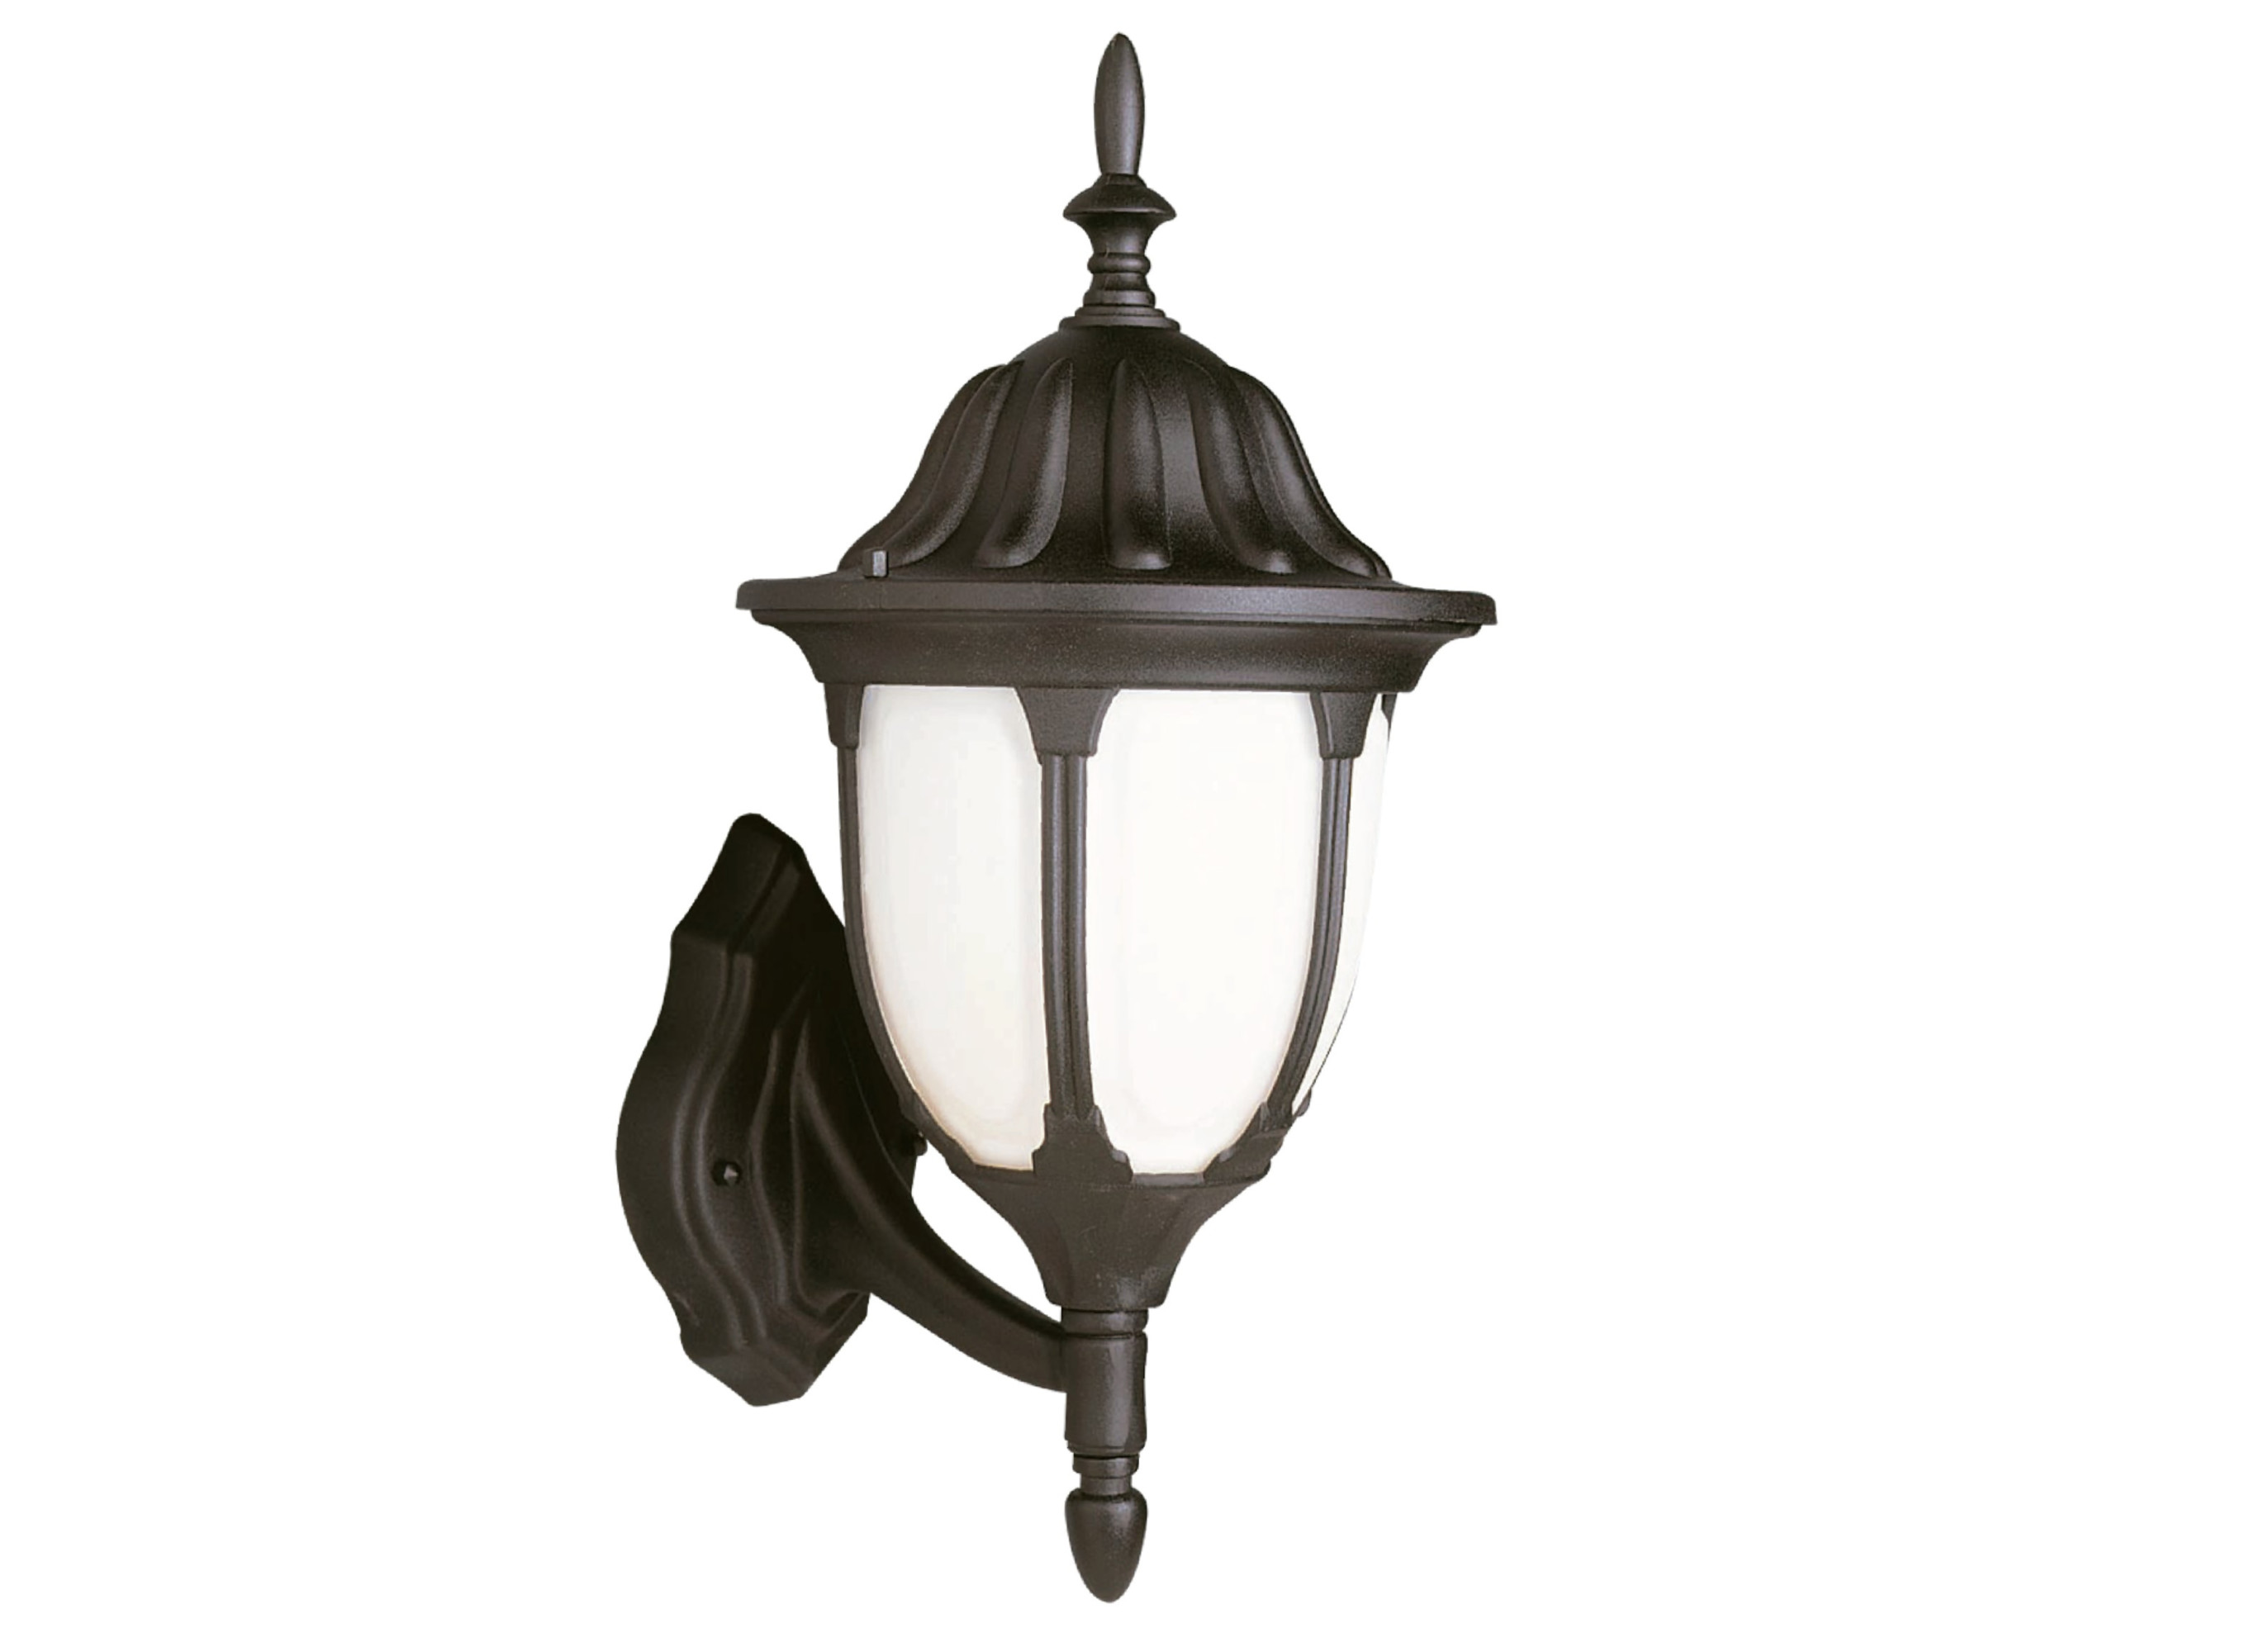 Trans Globe Lighting 4041 1 Light Up Lighting Outdoor Large Wall Sconce From The Outdoor - image 2 of 2